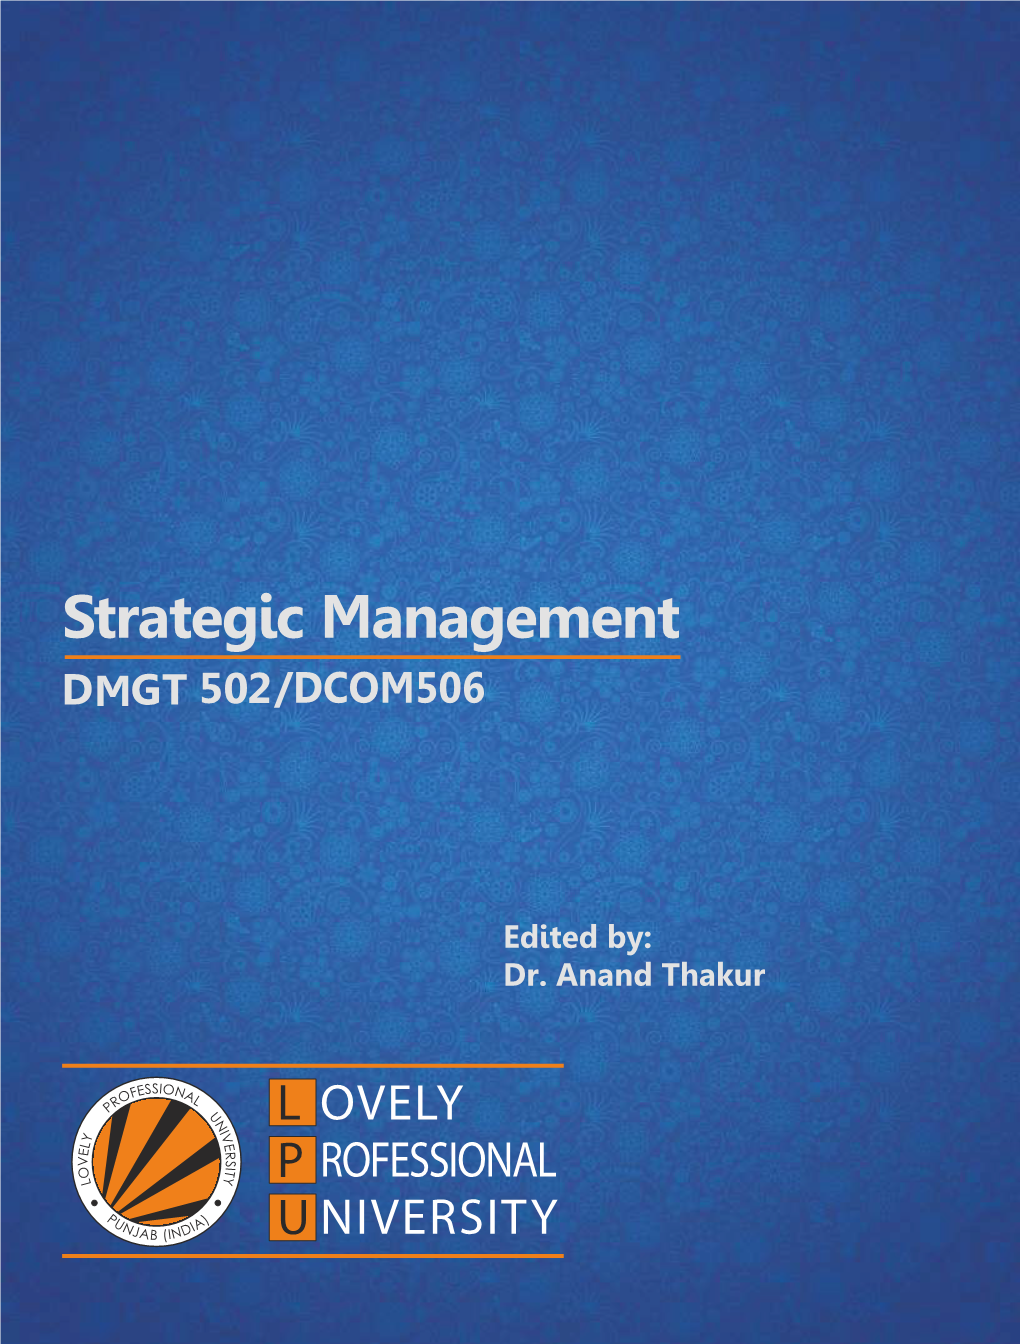 STRATEGIC MANAGEMENT Edited by Dr